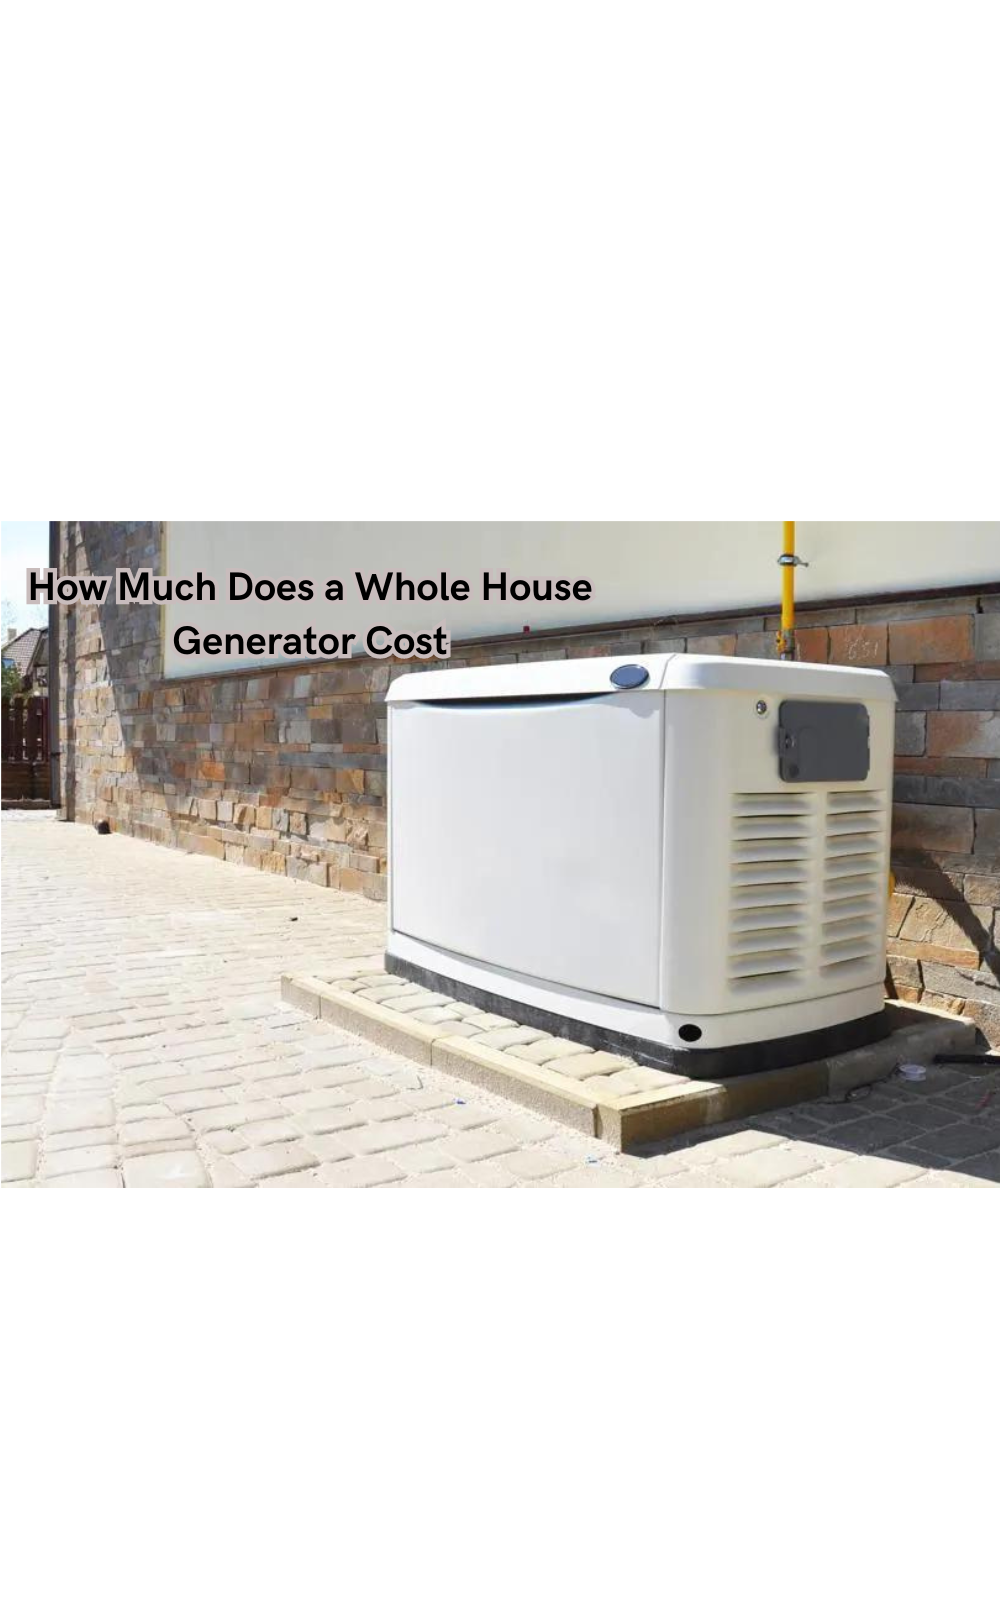 How Much Does a Whole House Generator Cost